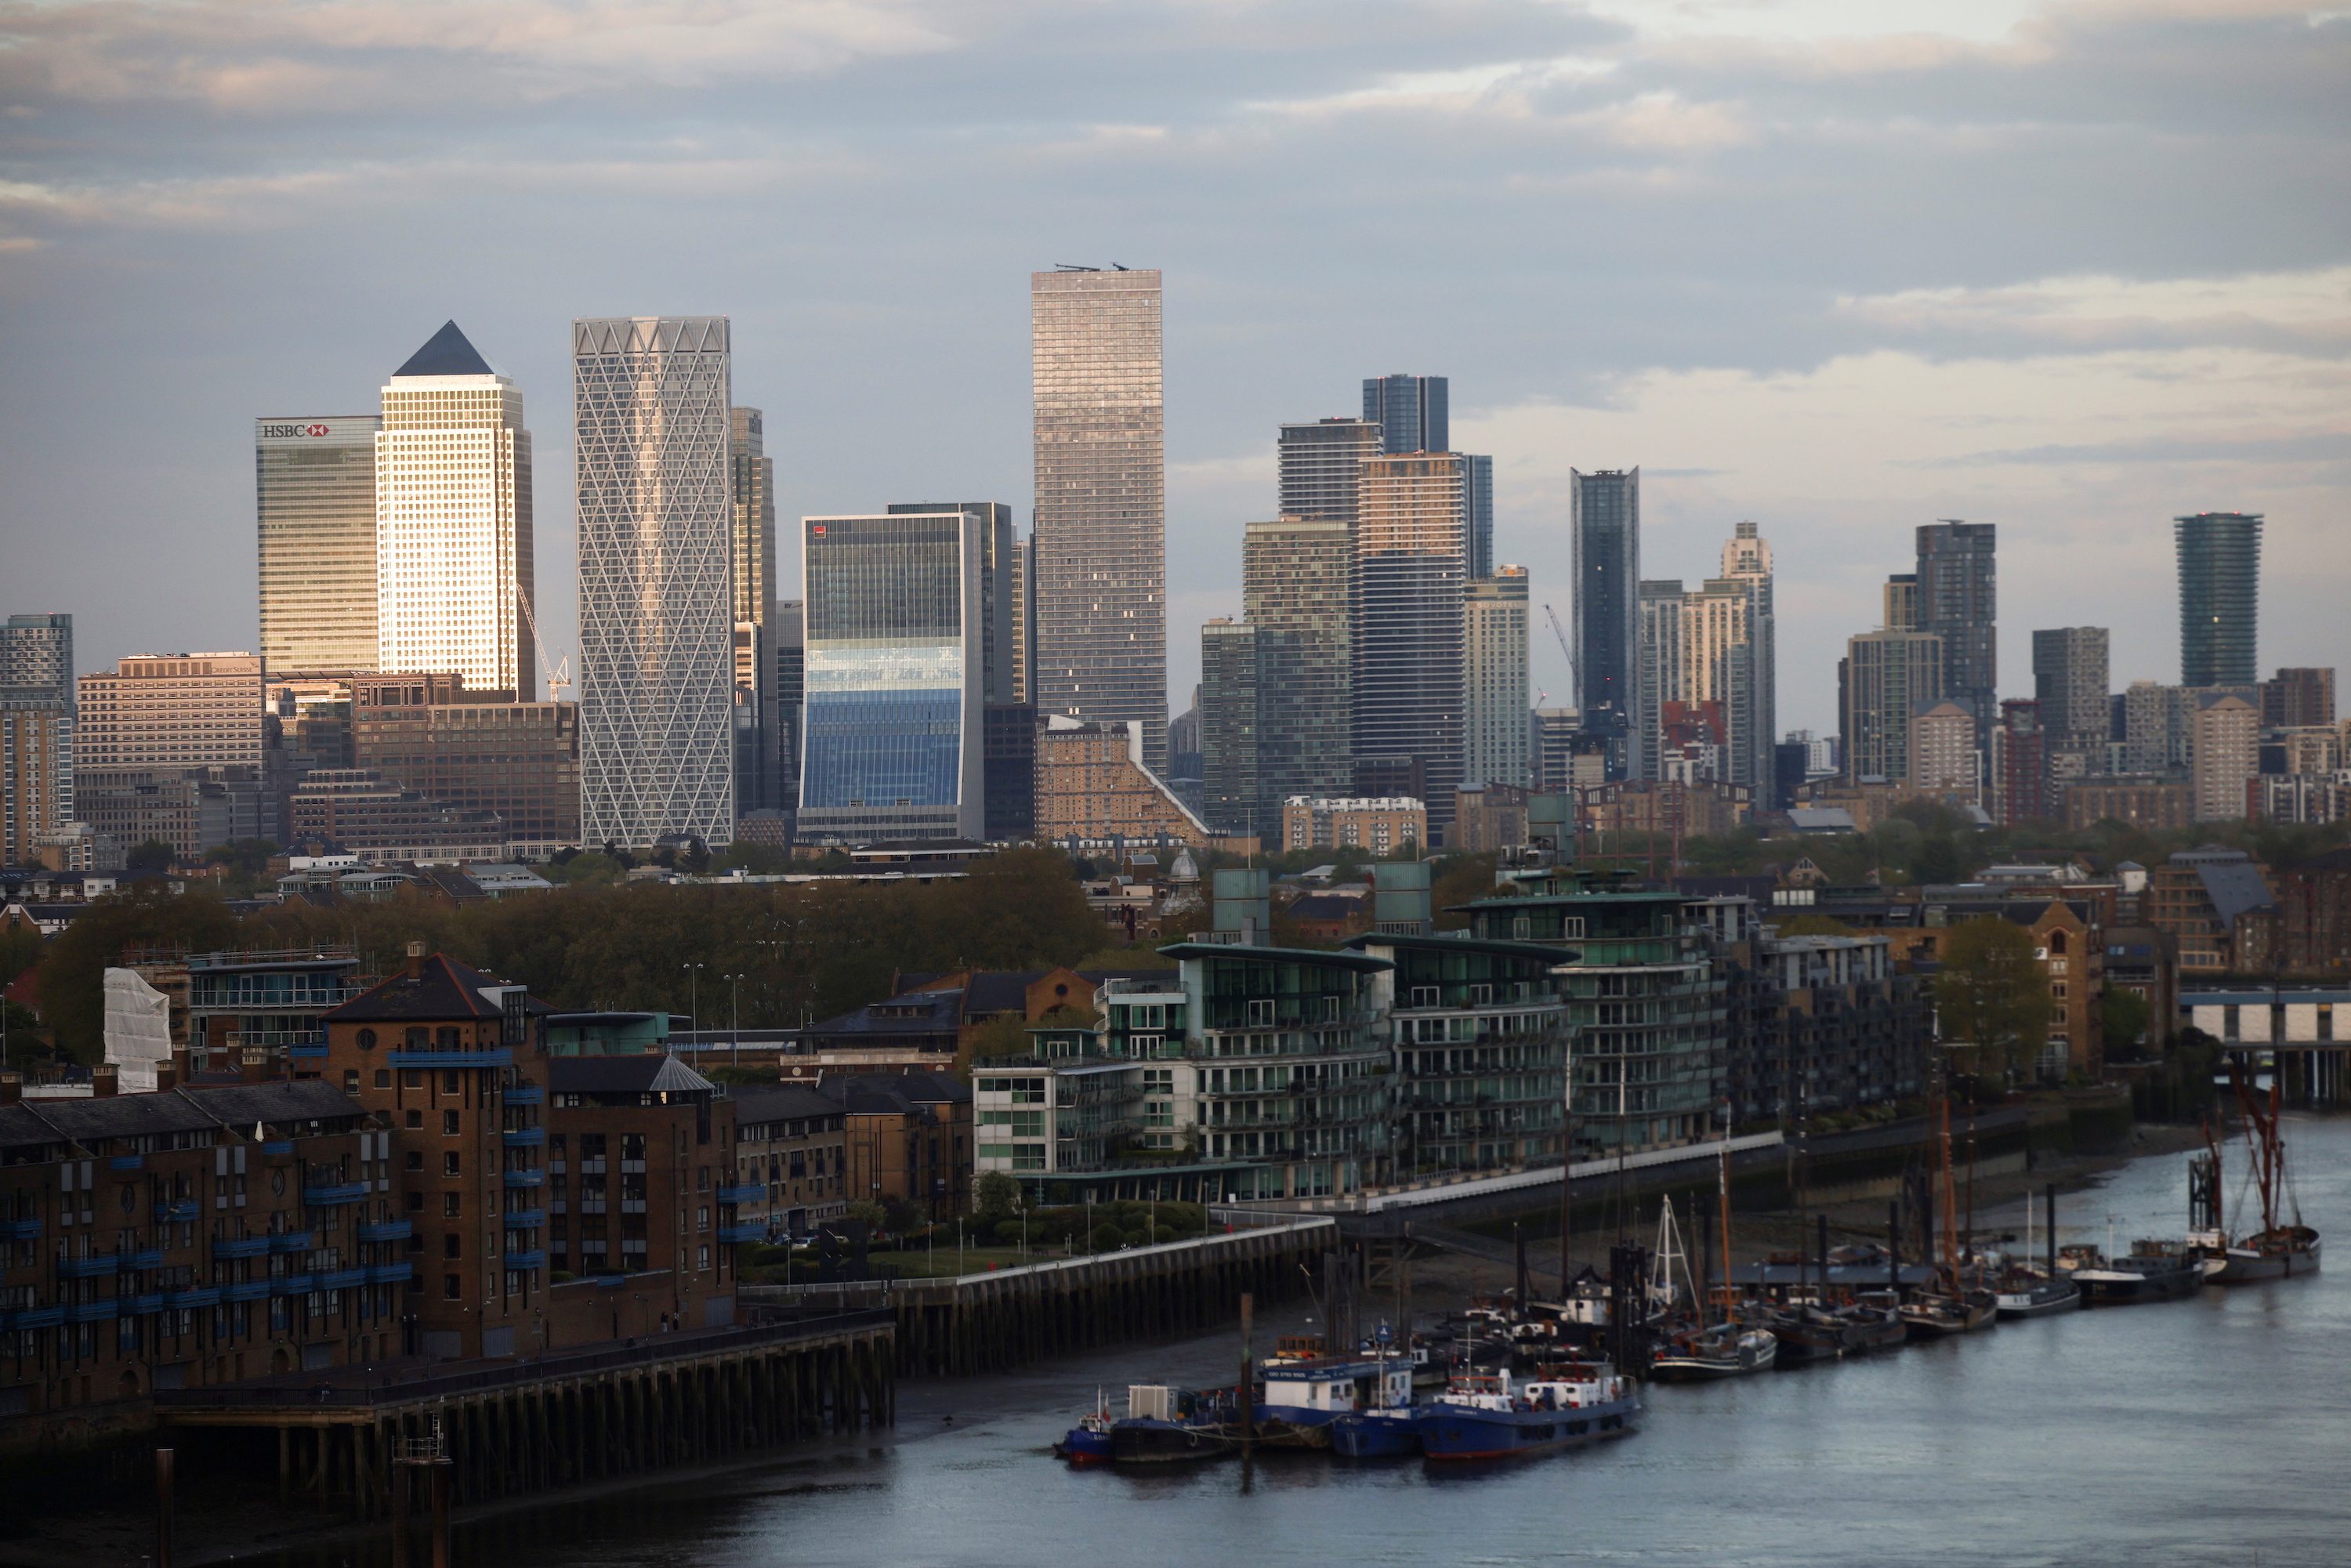 Bankers quit London as Brexit relocations to EU step up